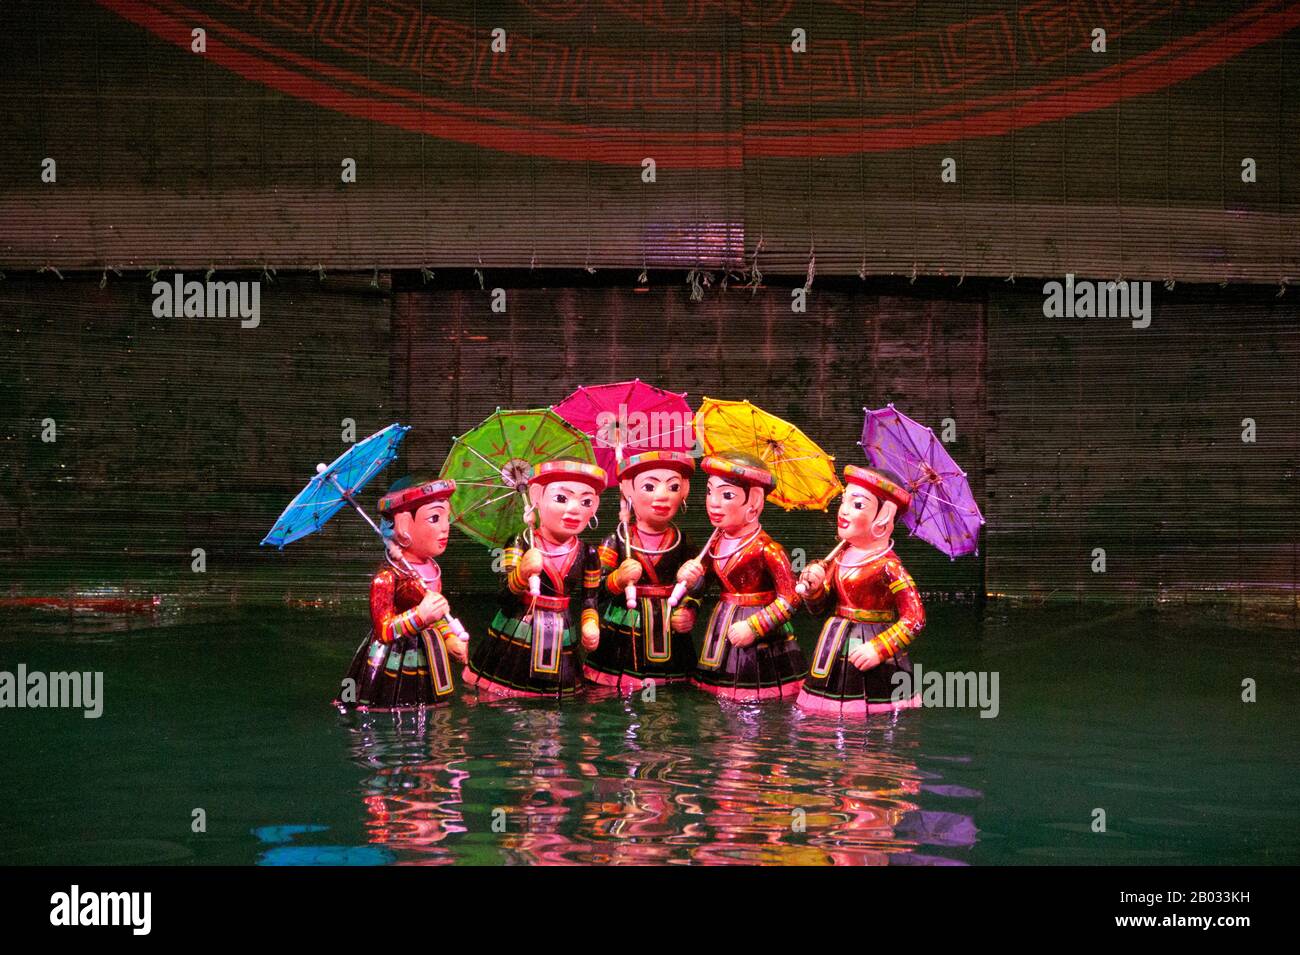 Water Puppetry or Múa rối nước, literally 'puppets that dance on water' originated in the Red River Delta. The puppets are carved from water-resistant wood to represent traditional rural lifestyles and mythical creatures. Standing behind the watery stage, waist-deep in water, the hidden puppeteers skillfully manoeuvre their wooden charges to the music of a traditional orchestra. Stock Photo